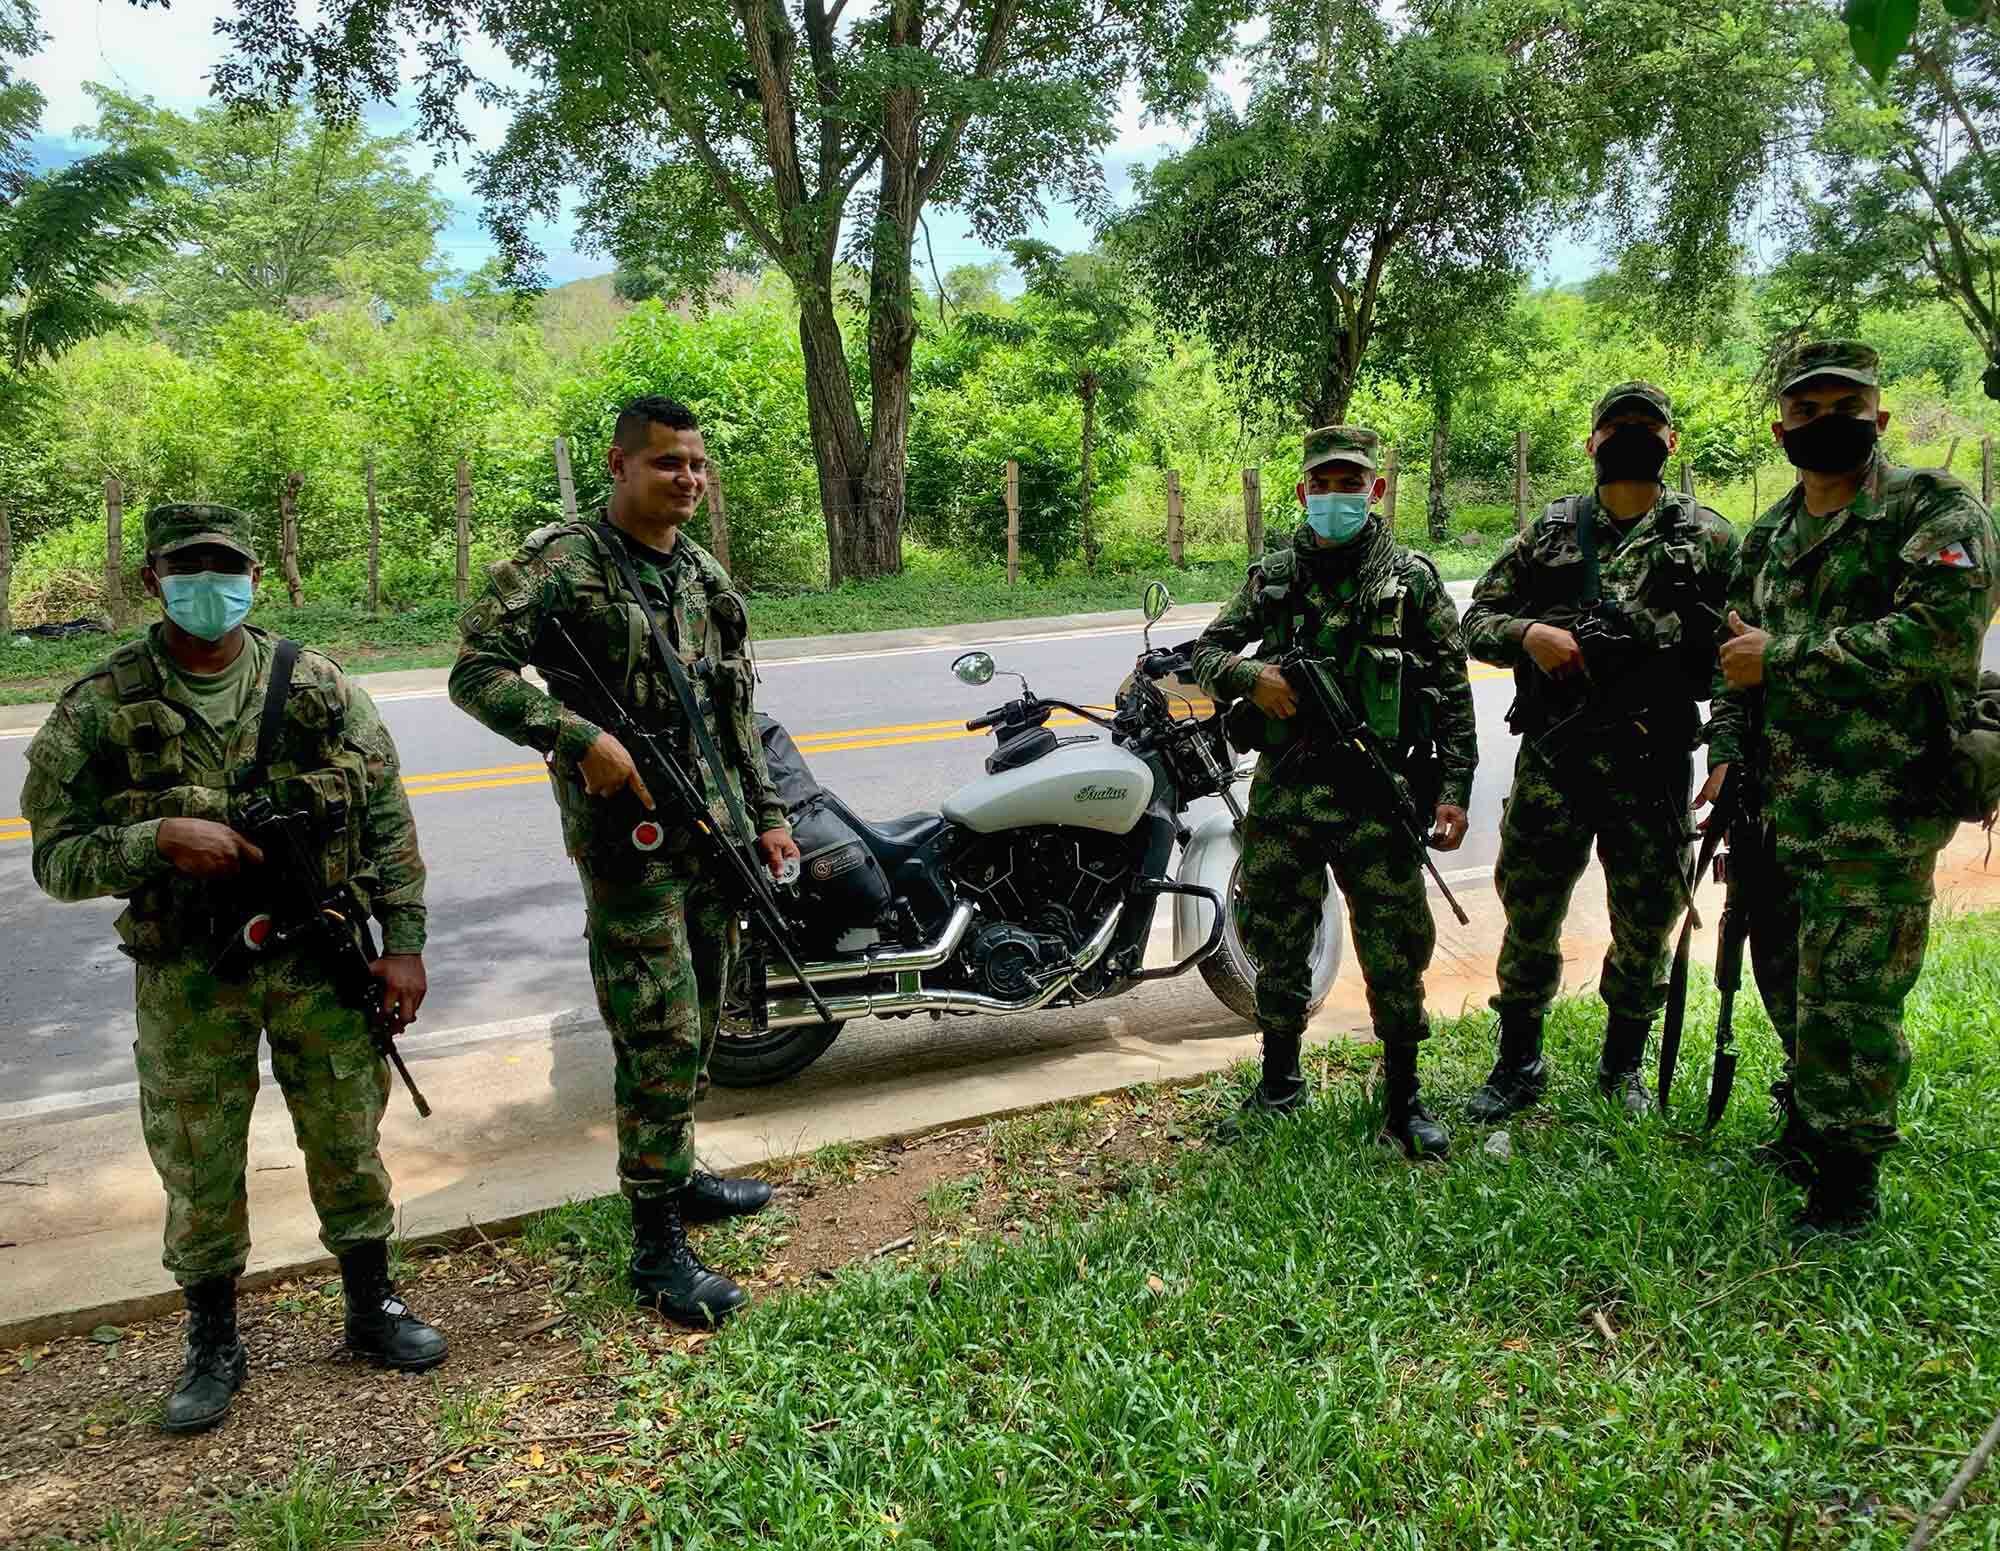 The military along the Ocaña-Cucuta road is present to prevent much of the illicit activity that exists around the Venezuelan border.